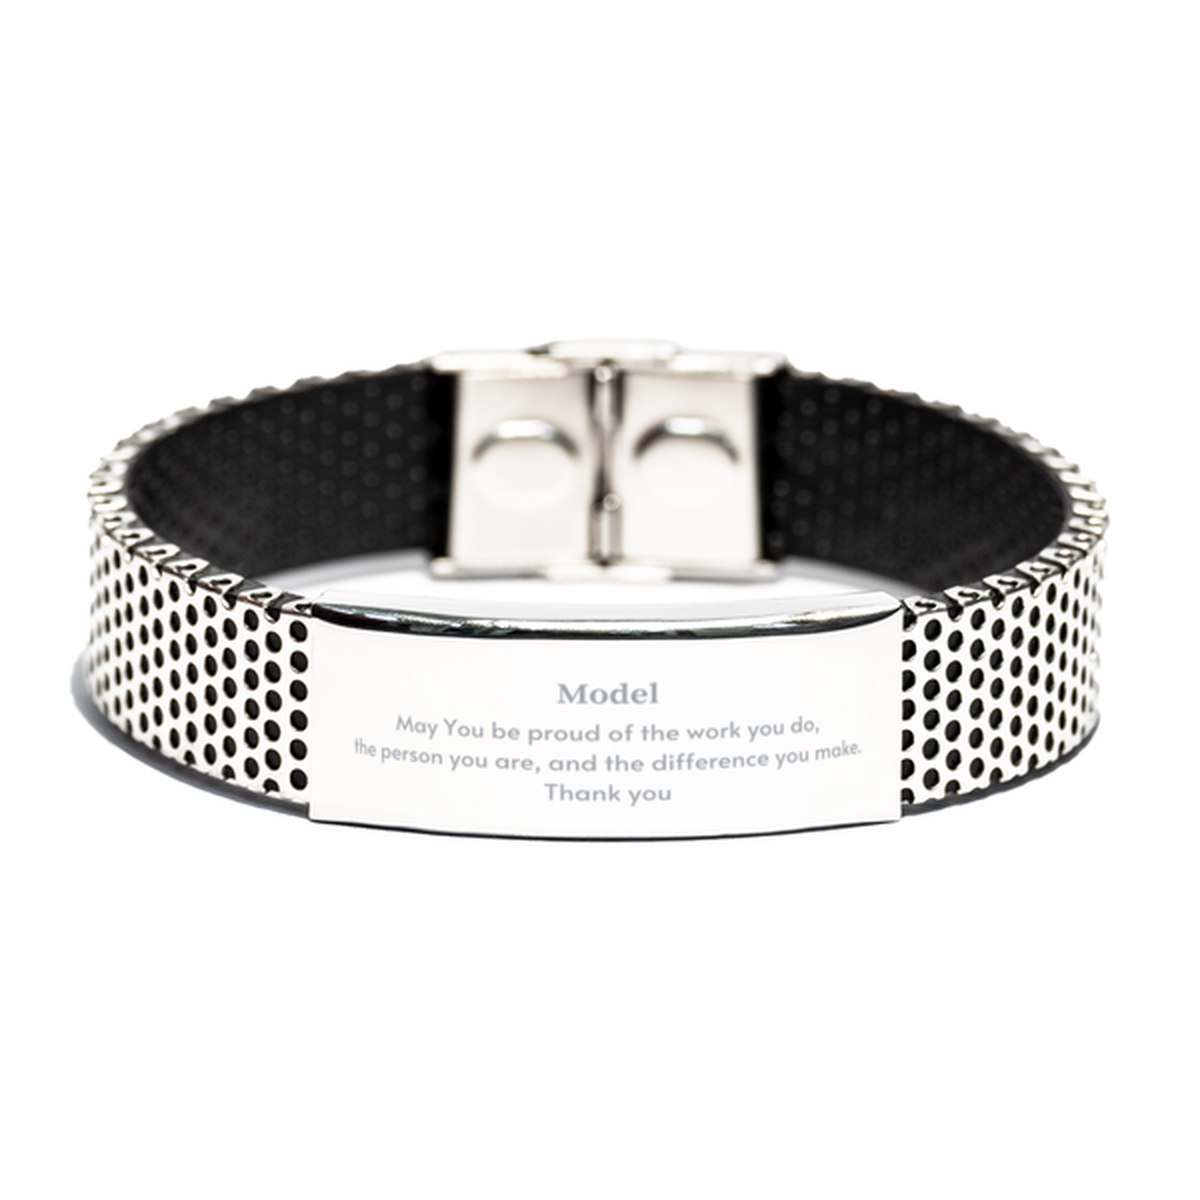 Heartwarming Stainless Steel Bracelet Retirement Coworkers Gifts for Model, Model May You be proud of the work you do, the person you are Gifts for Boss Men Women Friends